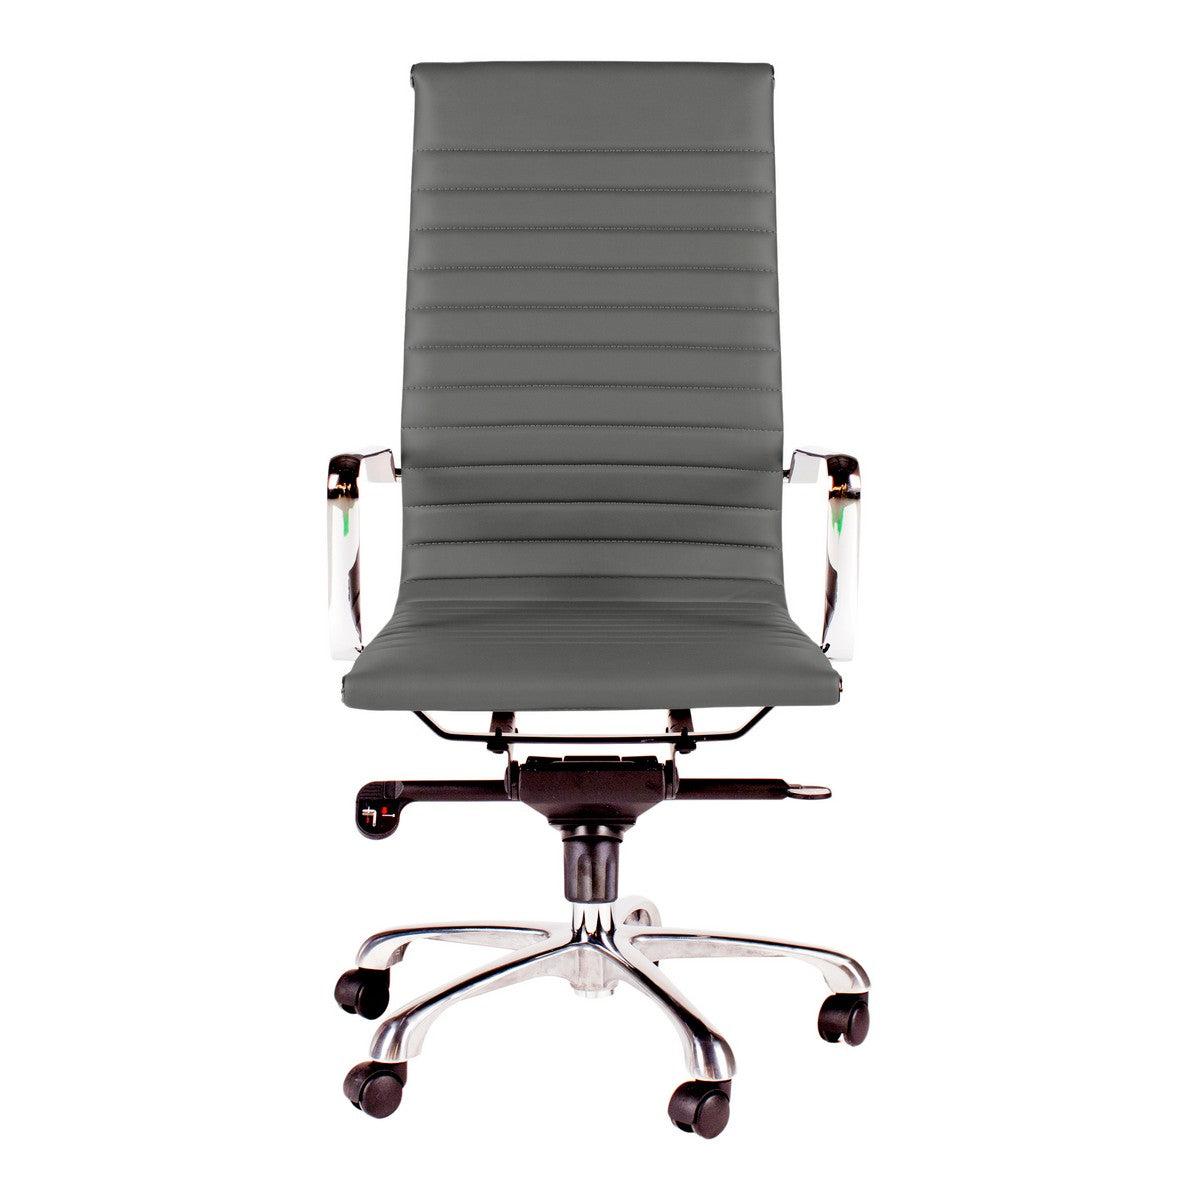 Moe's Home Collection Omega Swivel office Chair High Back Grey - ZM-1001-29 - Moe's Home Collection - Office Chairs - Minimal And Modern - 1